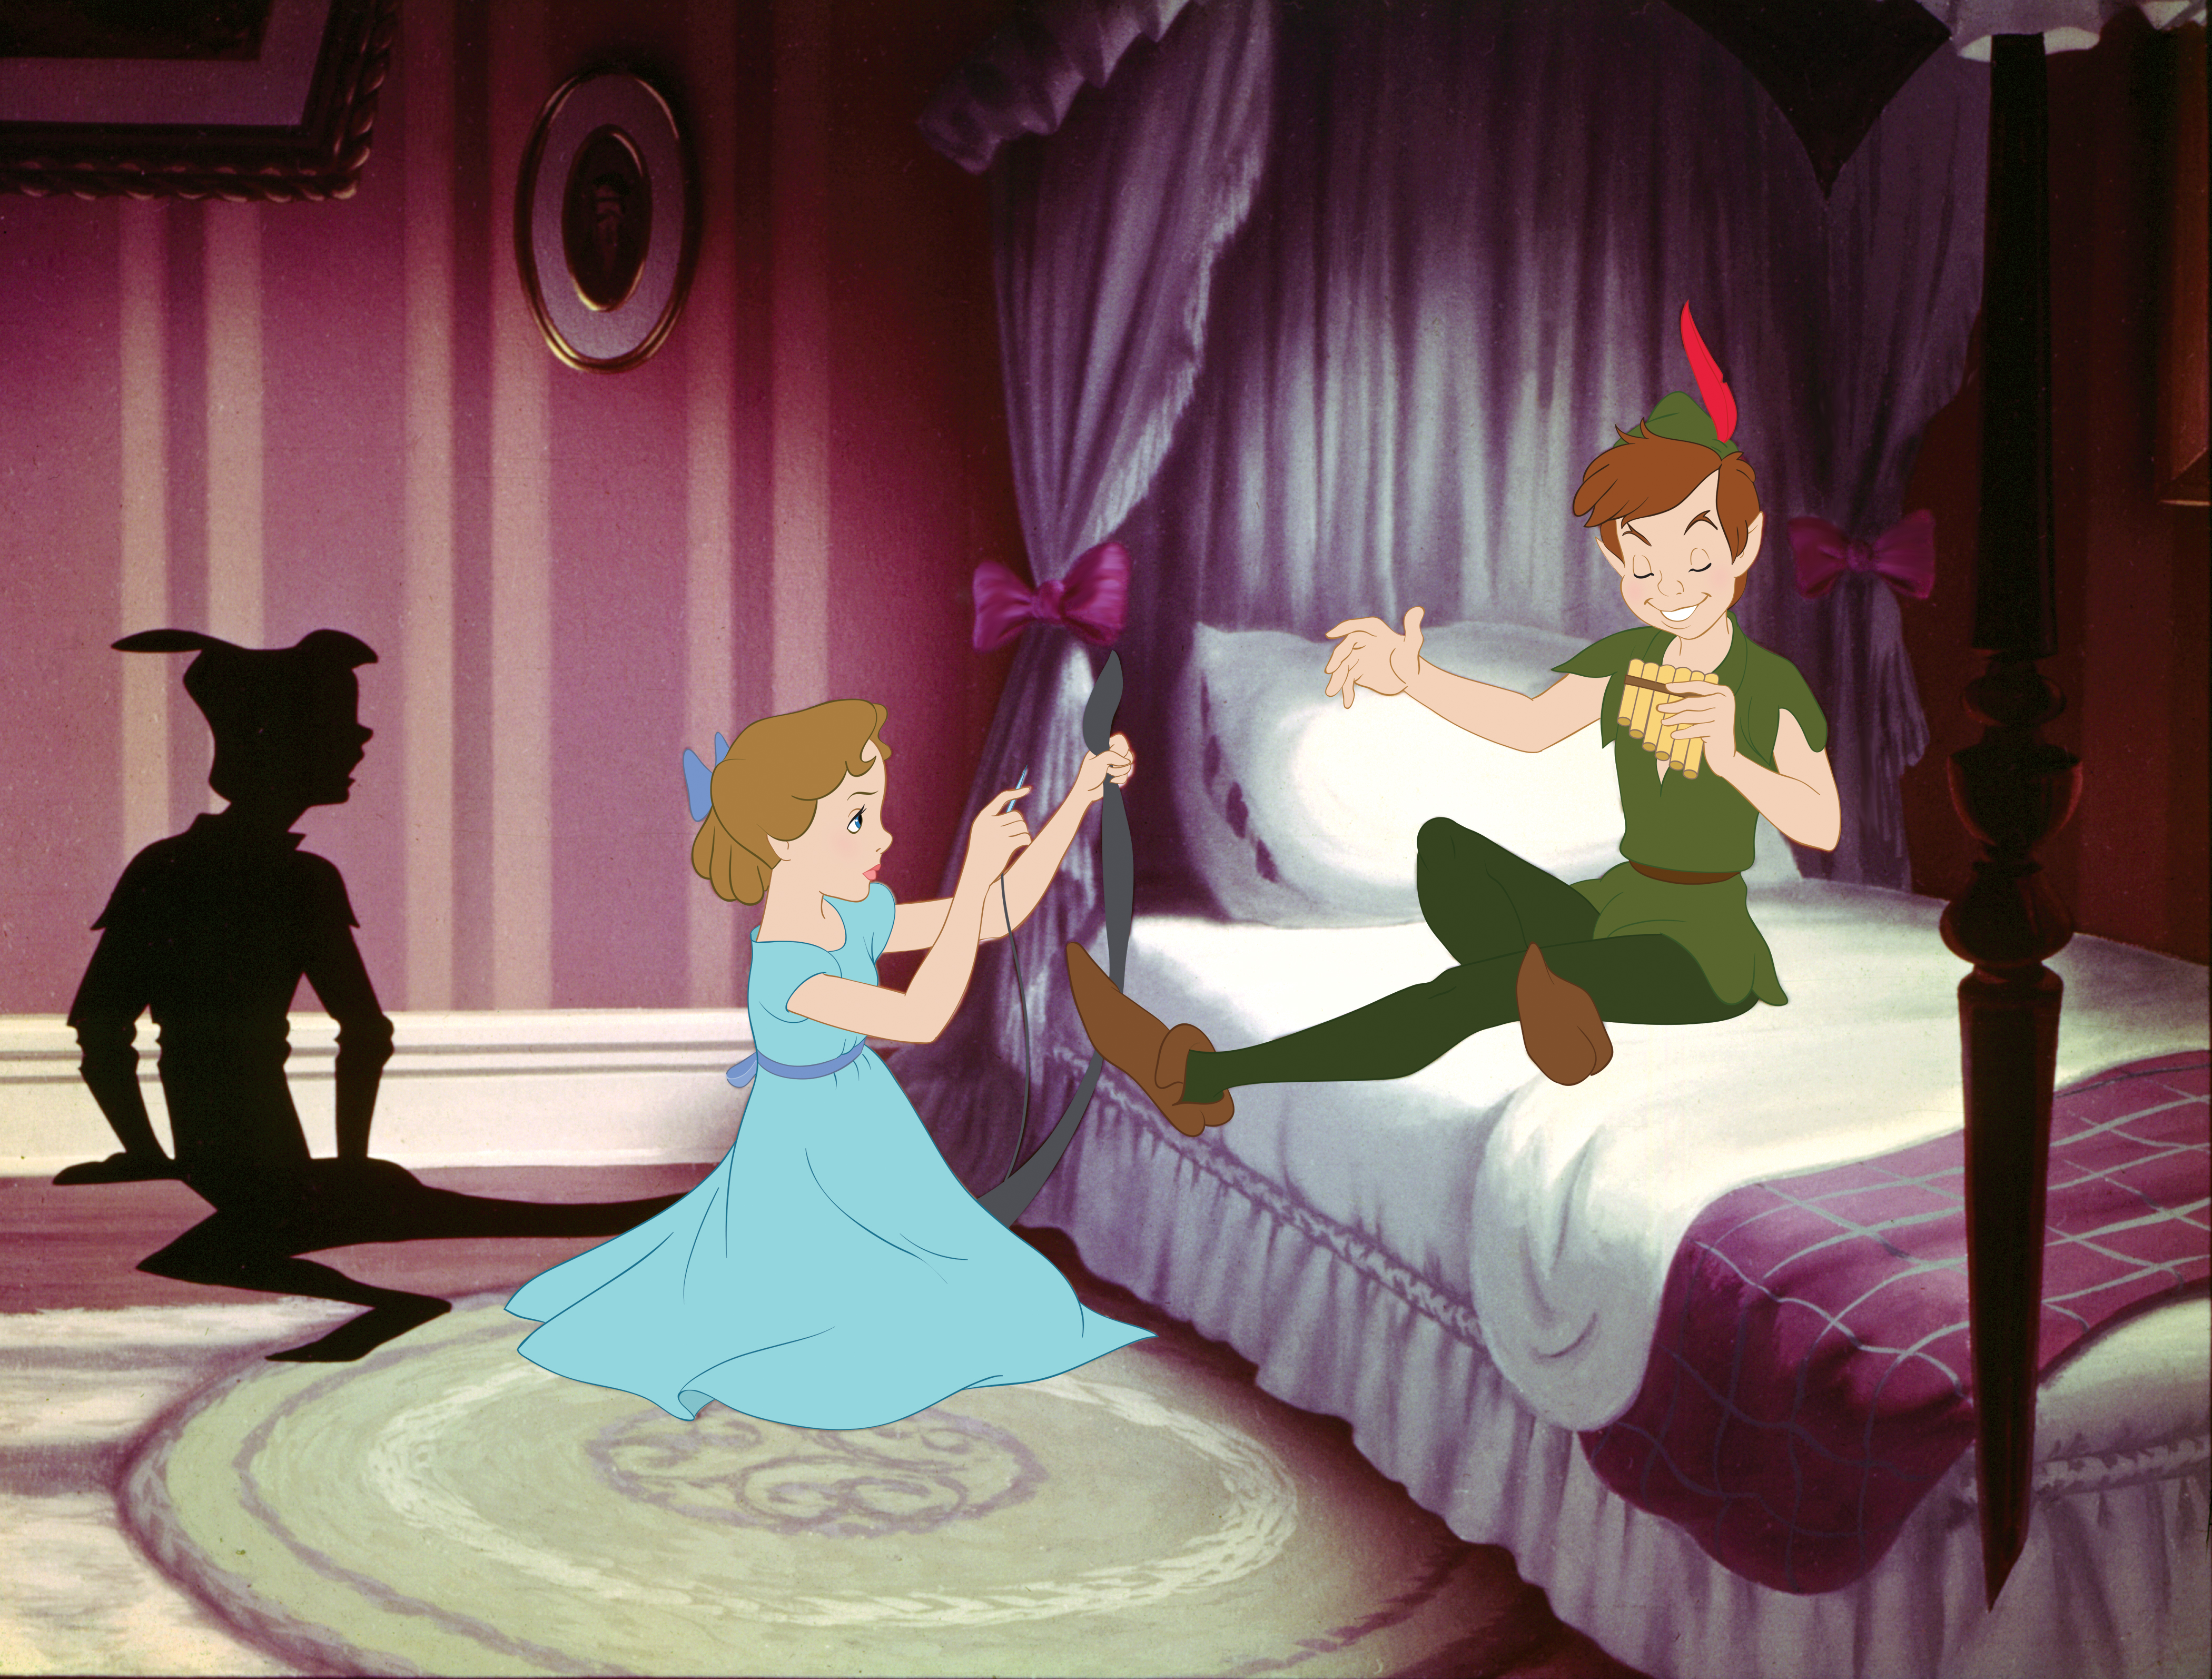 Peter Pan - Wendy and Peter